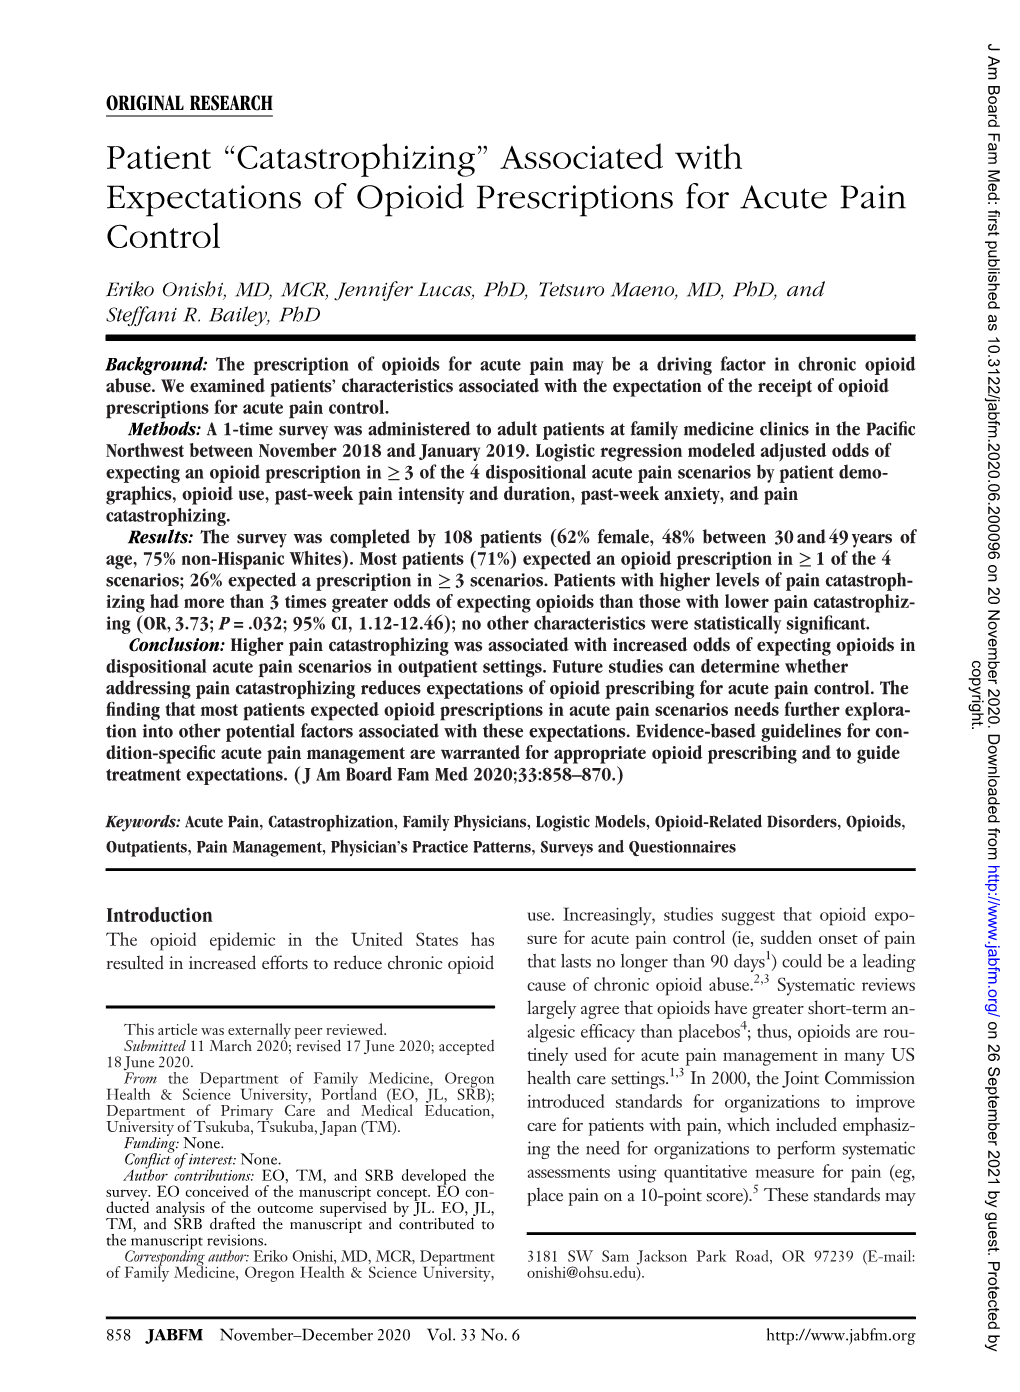 Associated with Expectations of Opioid Prescriptions for Acute Pain Control